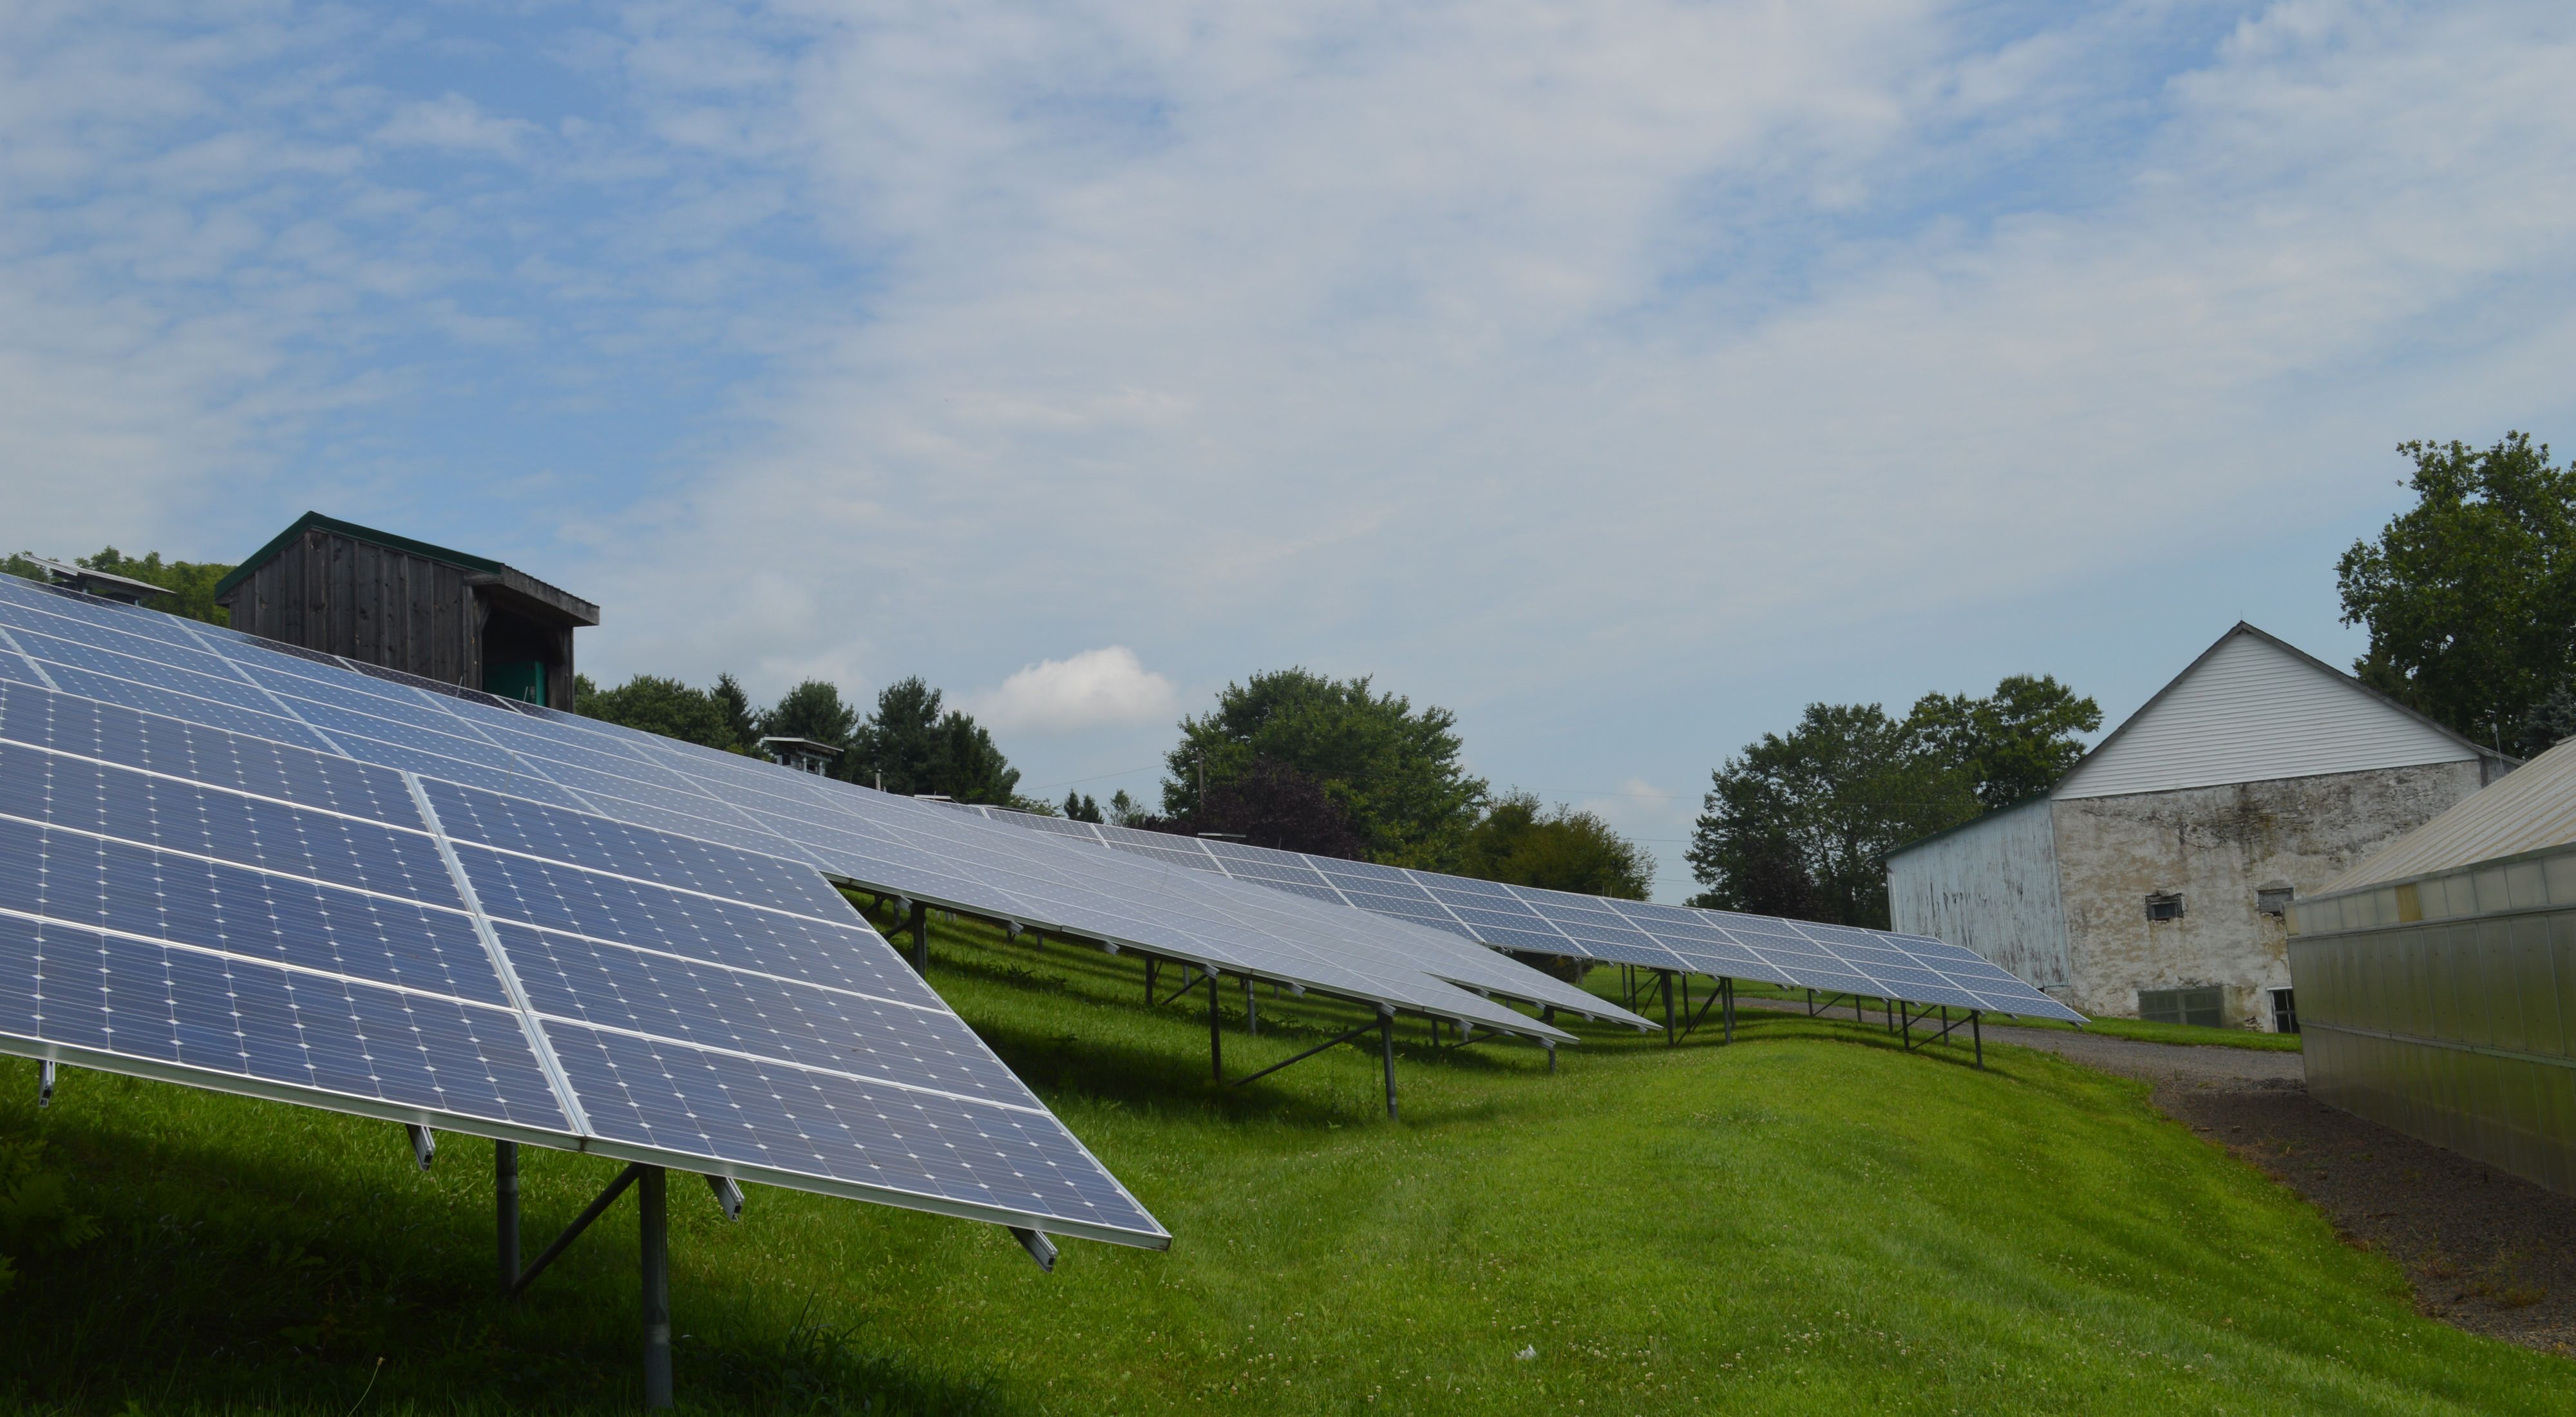 Solar panels on grassy foreground, barn in background.